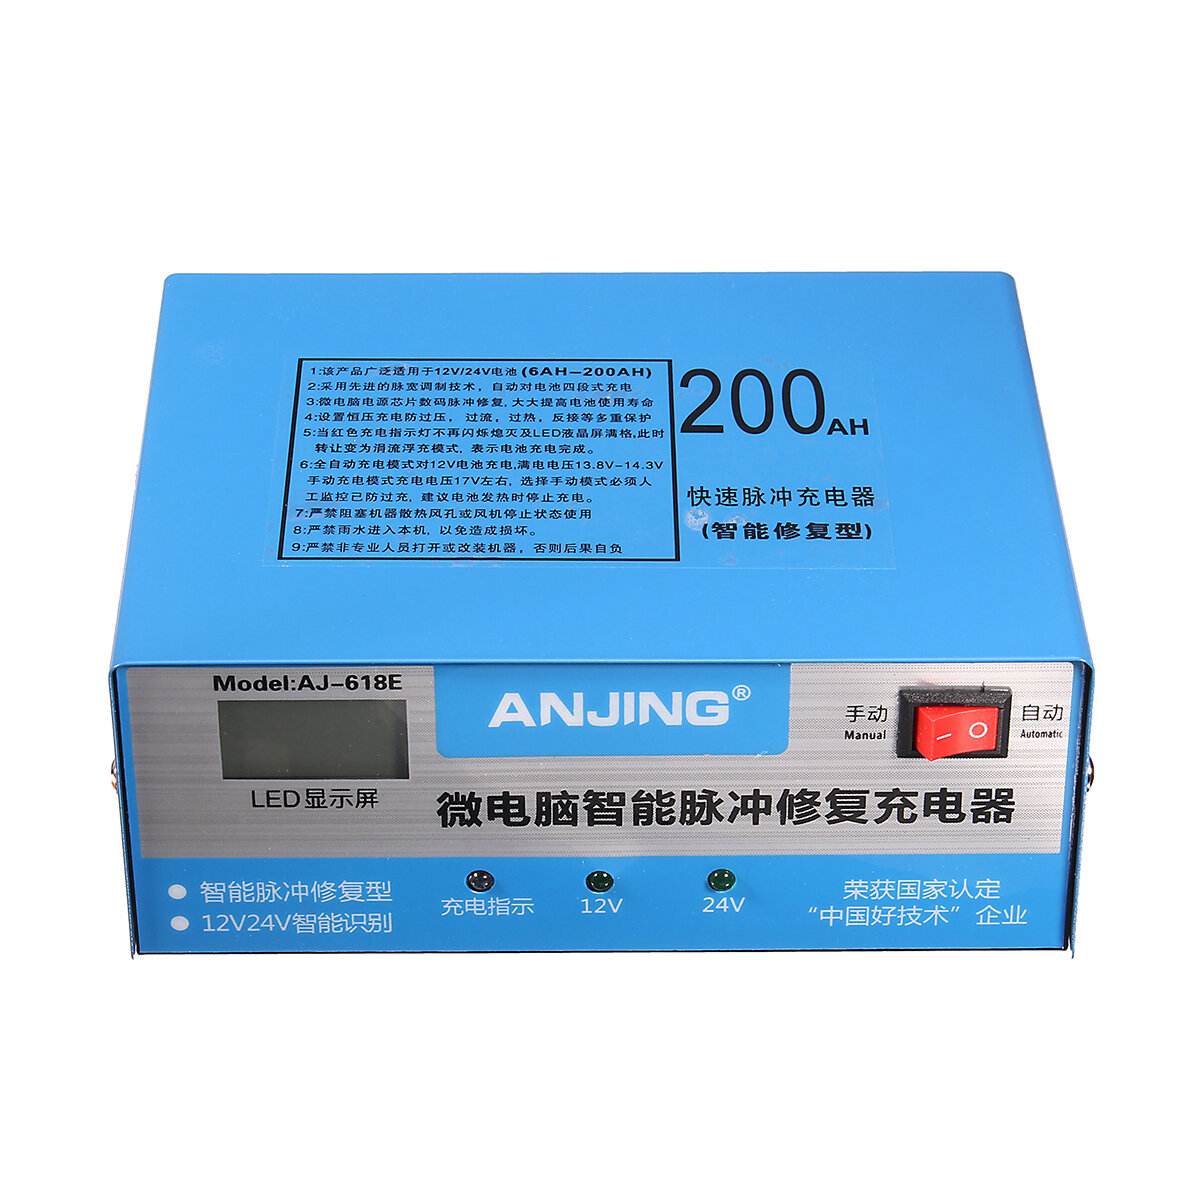 ANJING AJ-618E 130V-250V 200AH Automatic Battery Charger Intelligent Pulse Repair Battery Charger